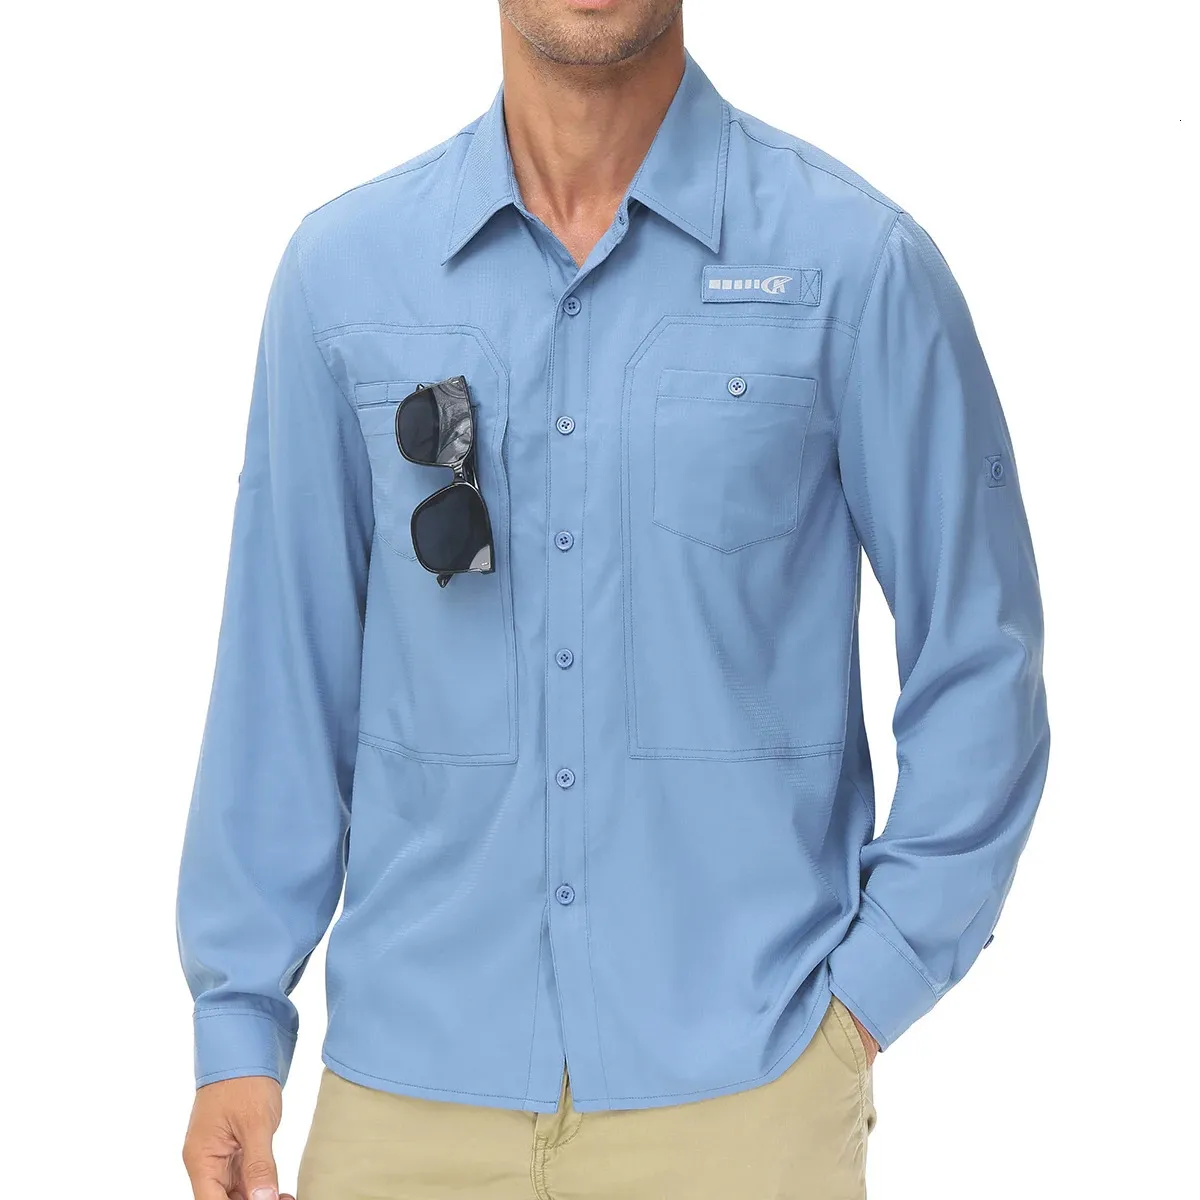 Mens UPF 50 Long Sleeve Fishing Shirt With Sun Protection And Breathable  Peach Twill Fabric Casual Button Down Shirt For Hiking, Work And Casual  Wear With Zipper Pocket From Pong05, $20.79